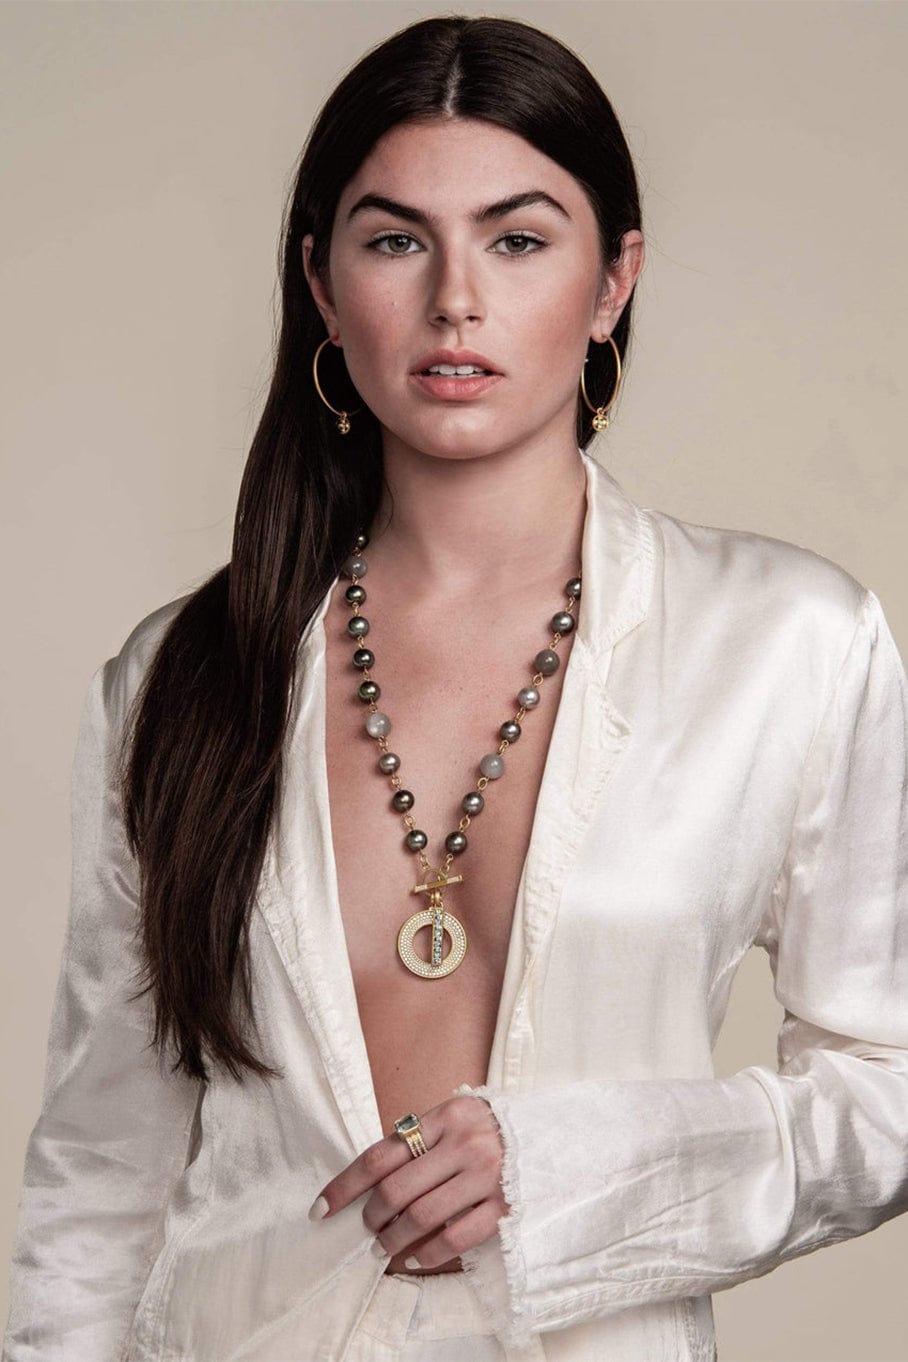 LEIGH MAXWELL-Tahitian Pearl and Grey Moonstone Necklace-YELLOW GOLD